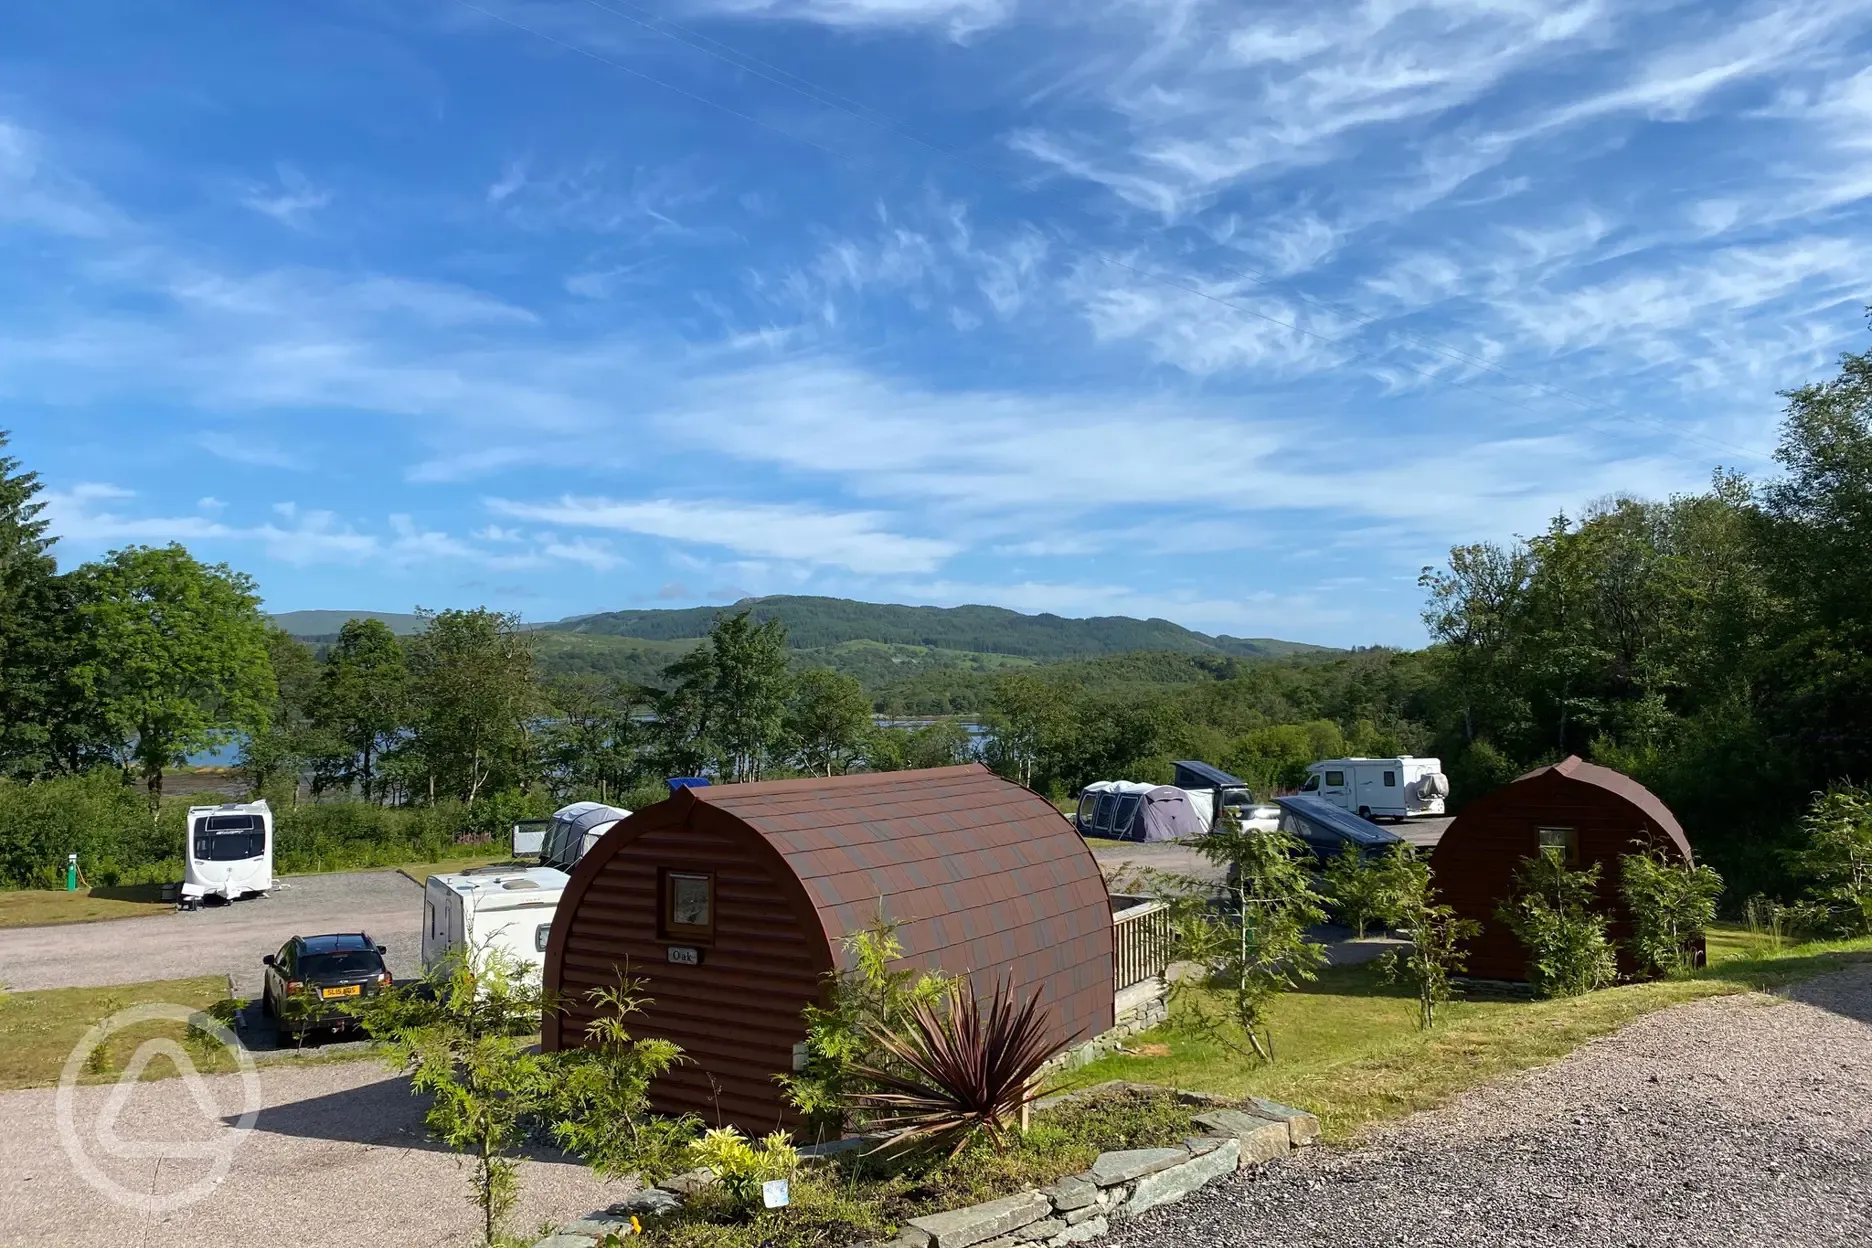 Glamping pods and hardstanding pitches